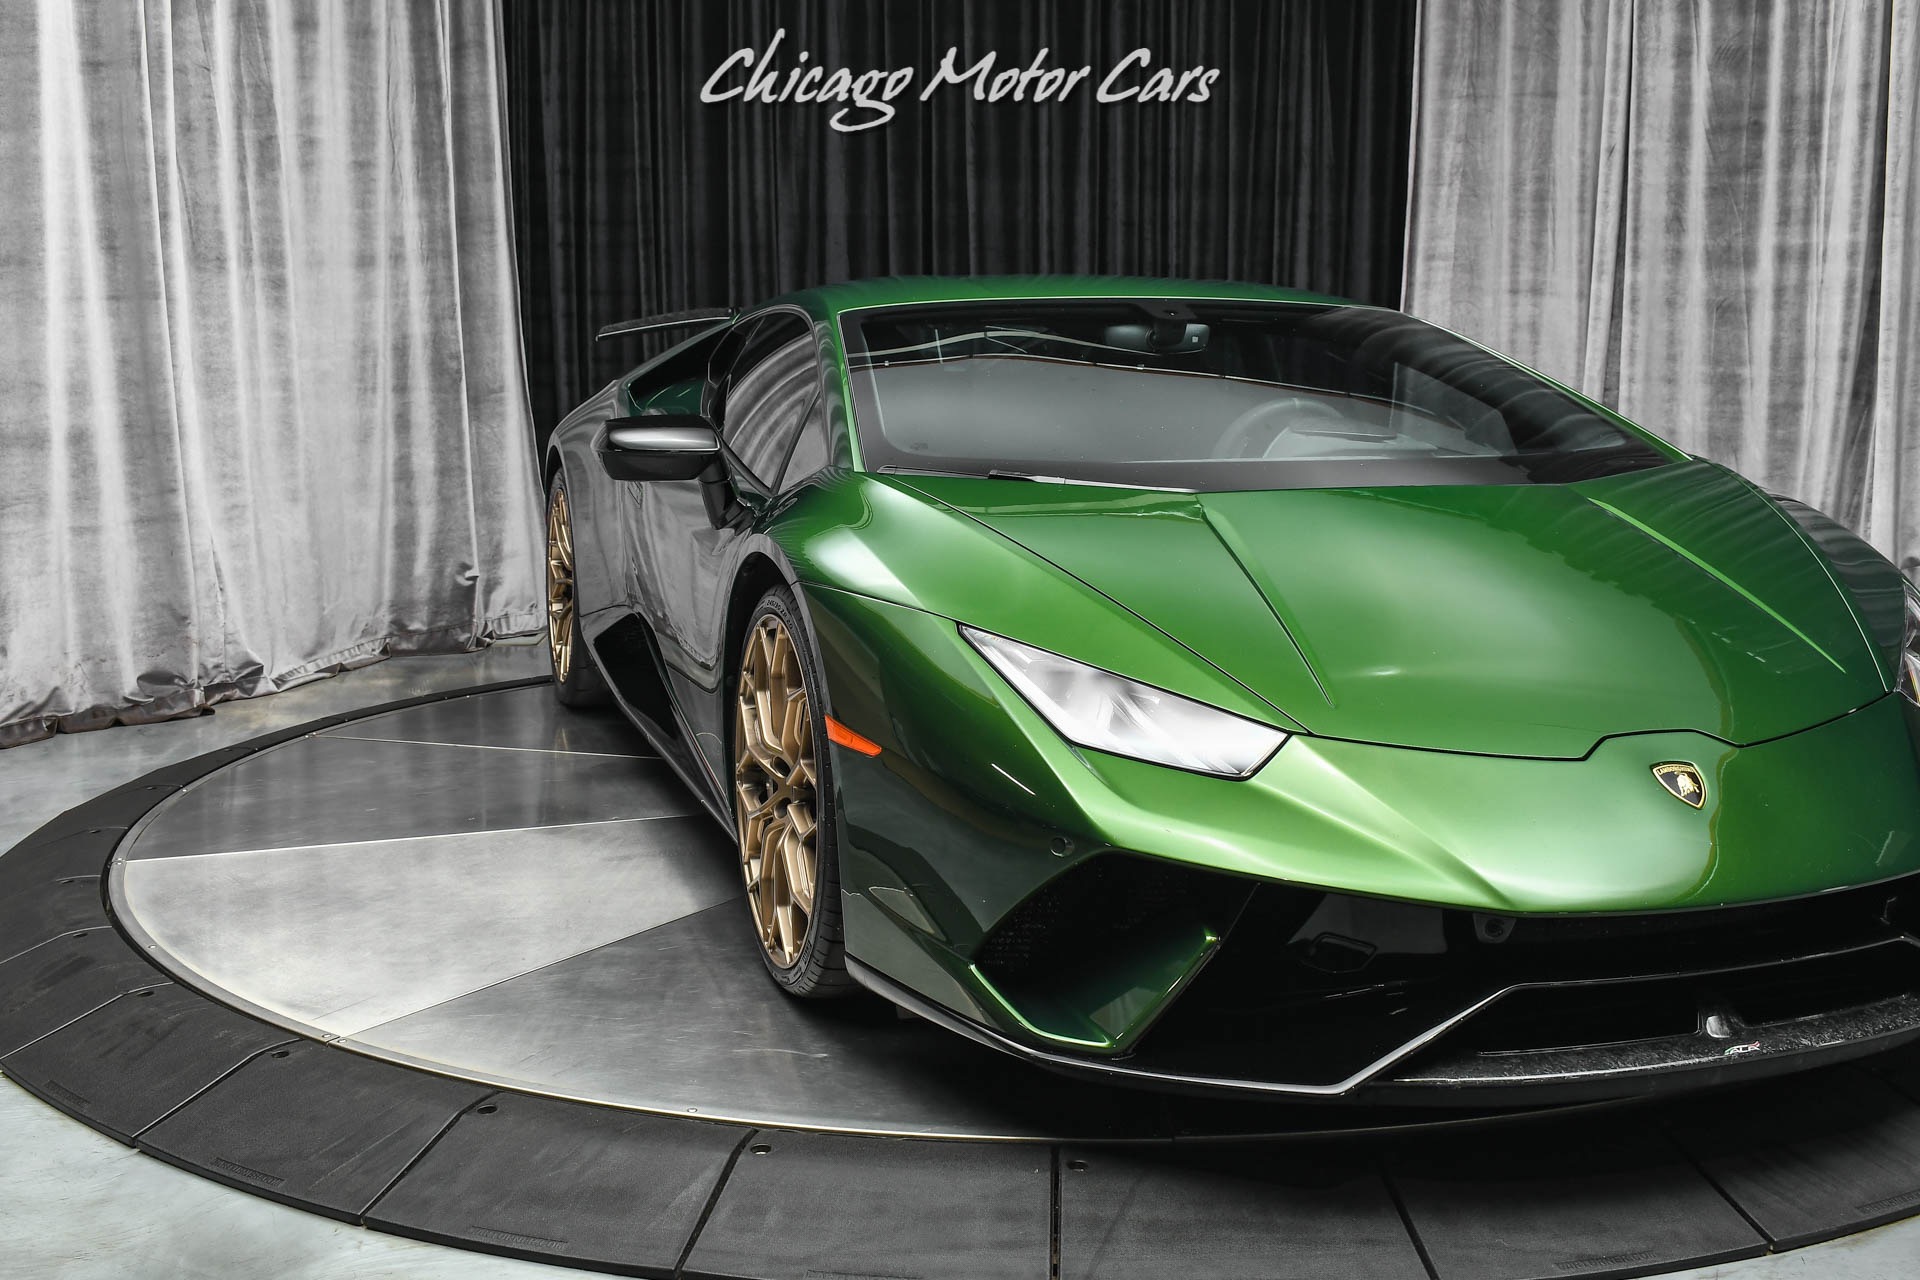 Used 2018 Lamborghini Huracan Performante LP640-4 Coupe FULLY LOADED! RARE  VERDE ERMES COLOR! For Sale (Special Pricing) | Chicago Motor Cars Stock  #18741A